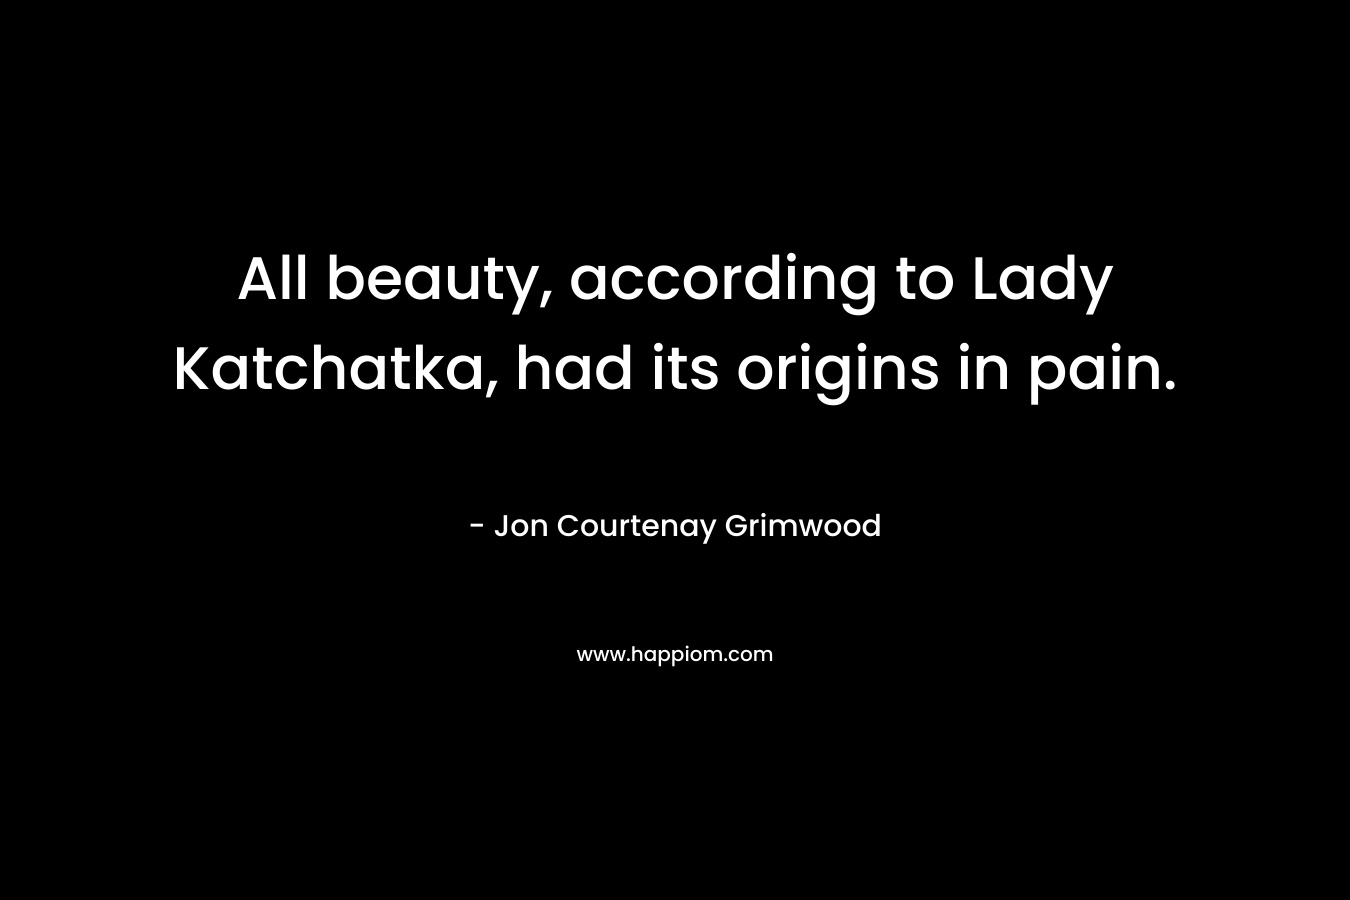 All beauty, according to Lady Katchatka, had its origins in pain.